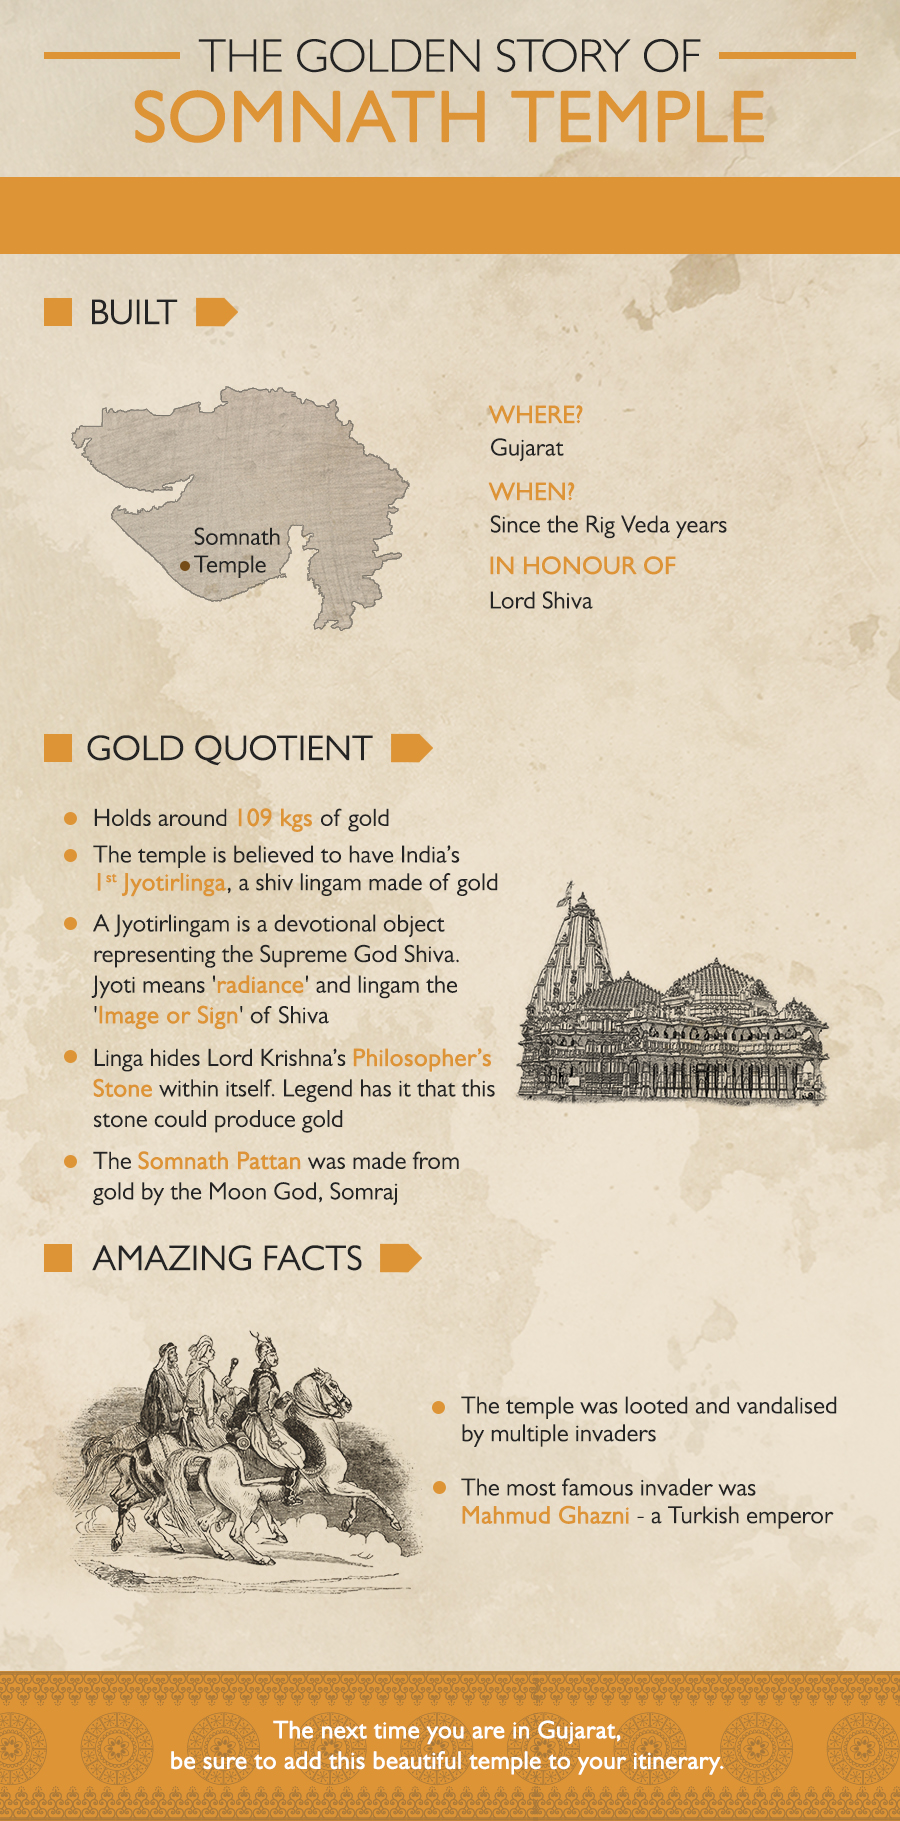 Years old Somnath temple is believed to have India's 1st Jyotirlinga, a shiv lingam made of Gold. Take a look at various facts which makes this temple a must visit if you are in Gujarat.